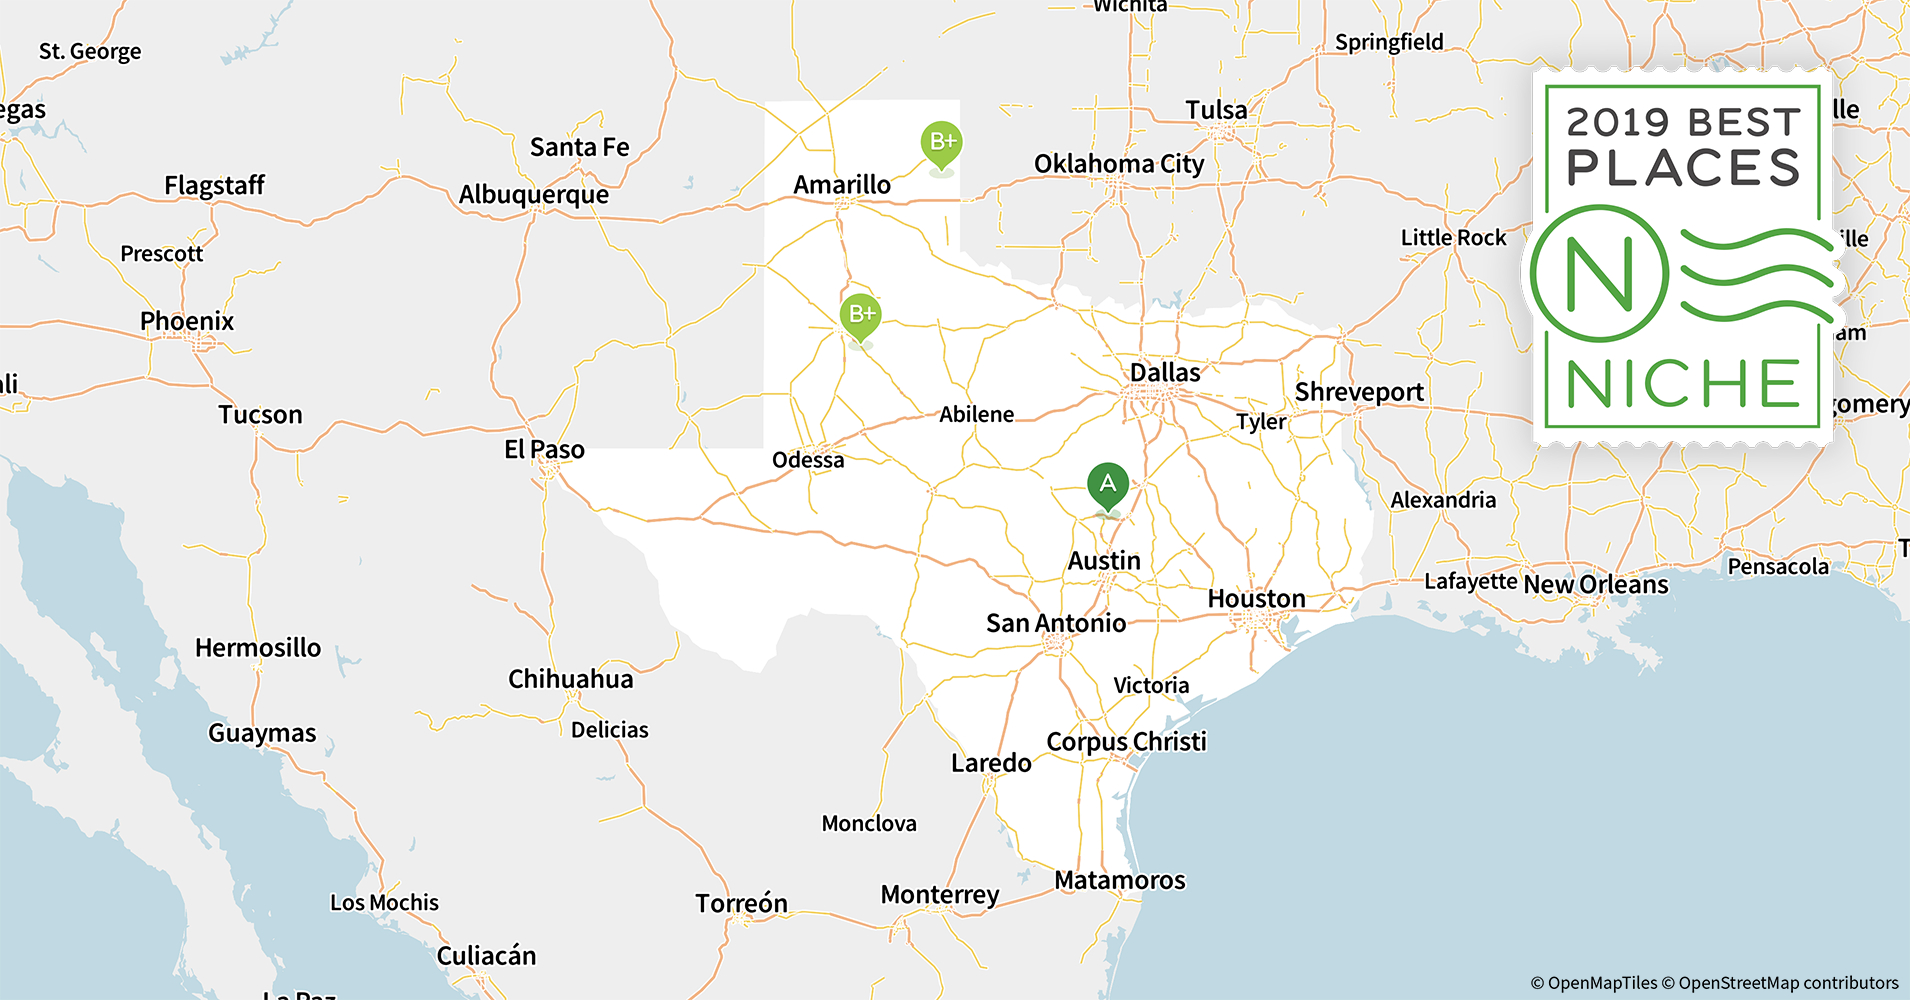 2019 Best Places To Retire In Texas - Niche - Top Spot Maps Texas